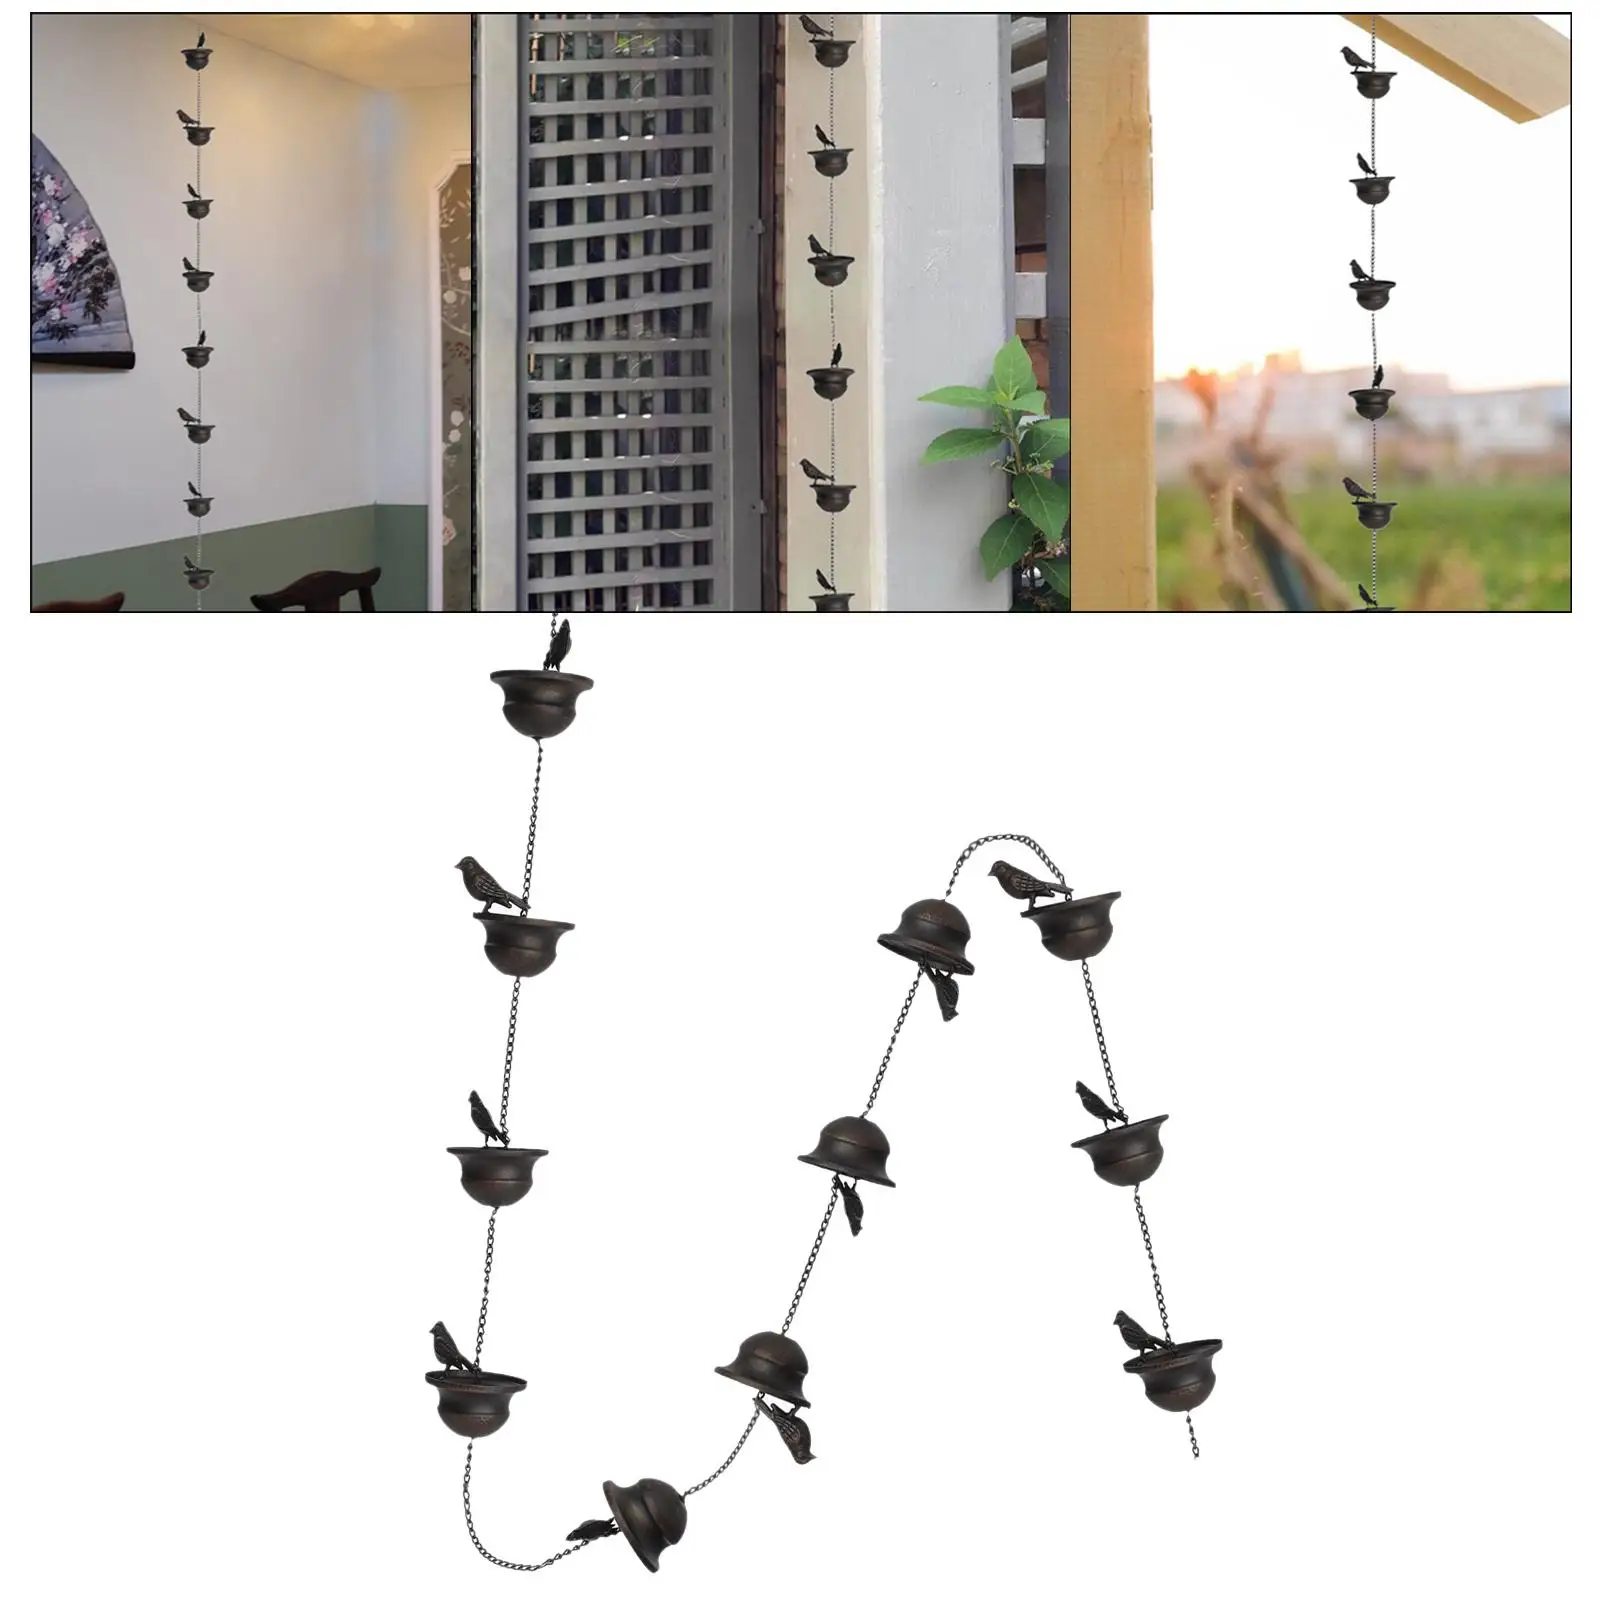 Bird Rain Chains for Gutters Replacement Downspouts Decorative Rainwater Catcher Chains 240cm for Gazebos Garden Home Outdoor